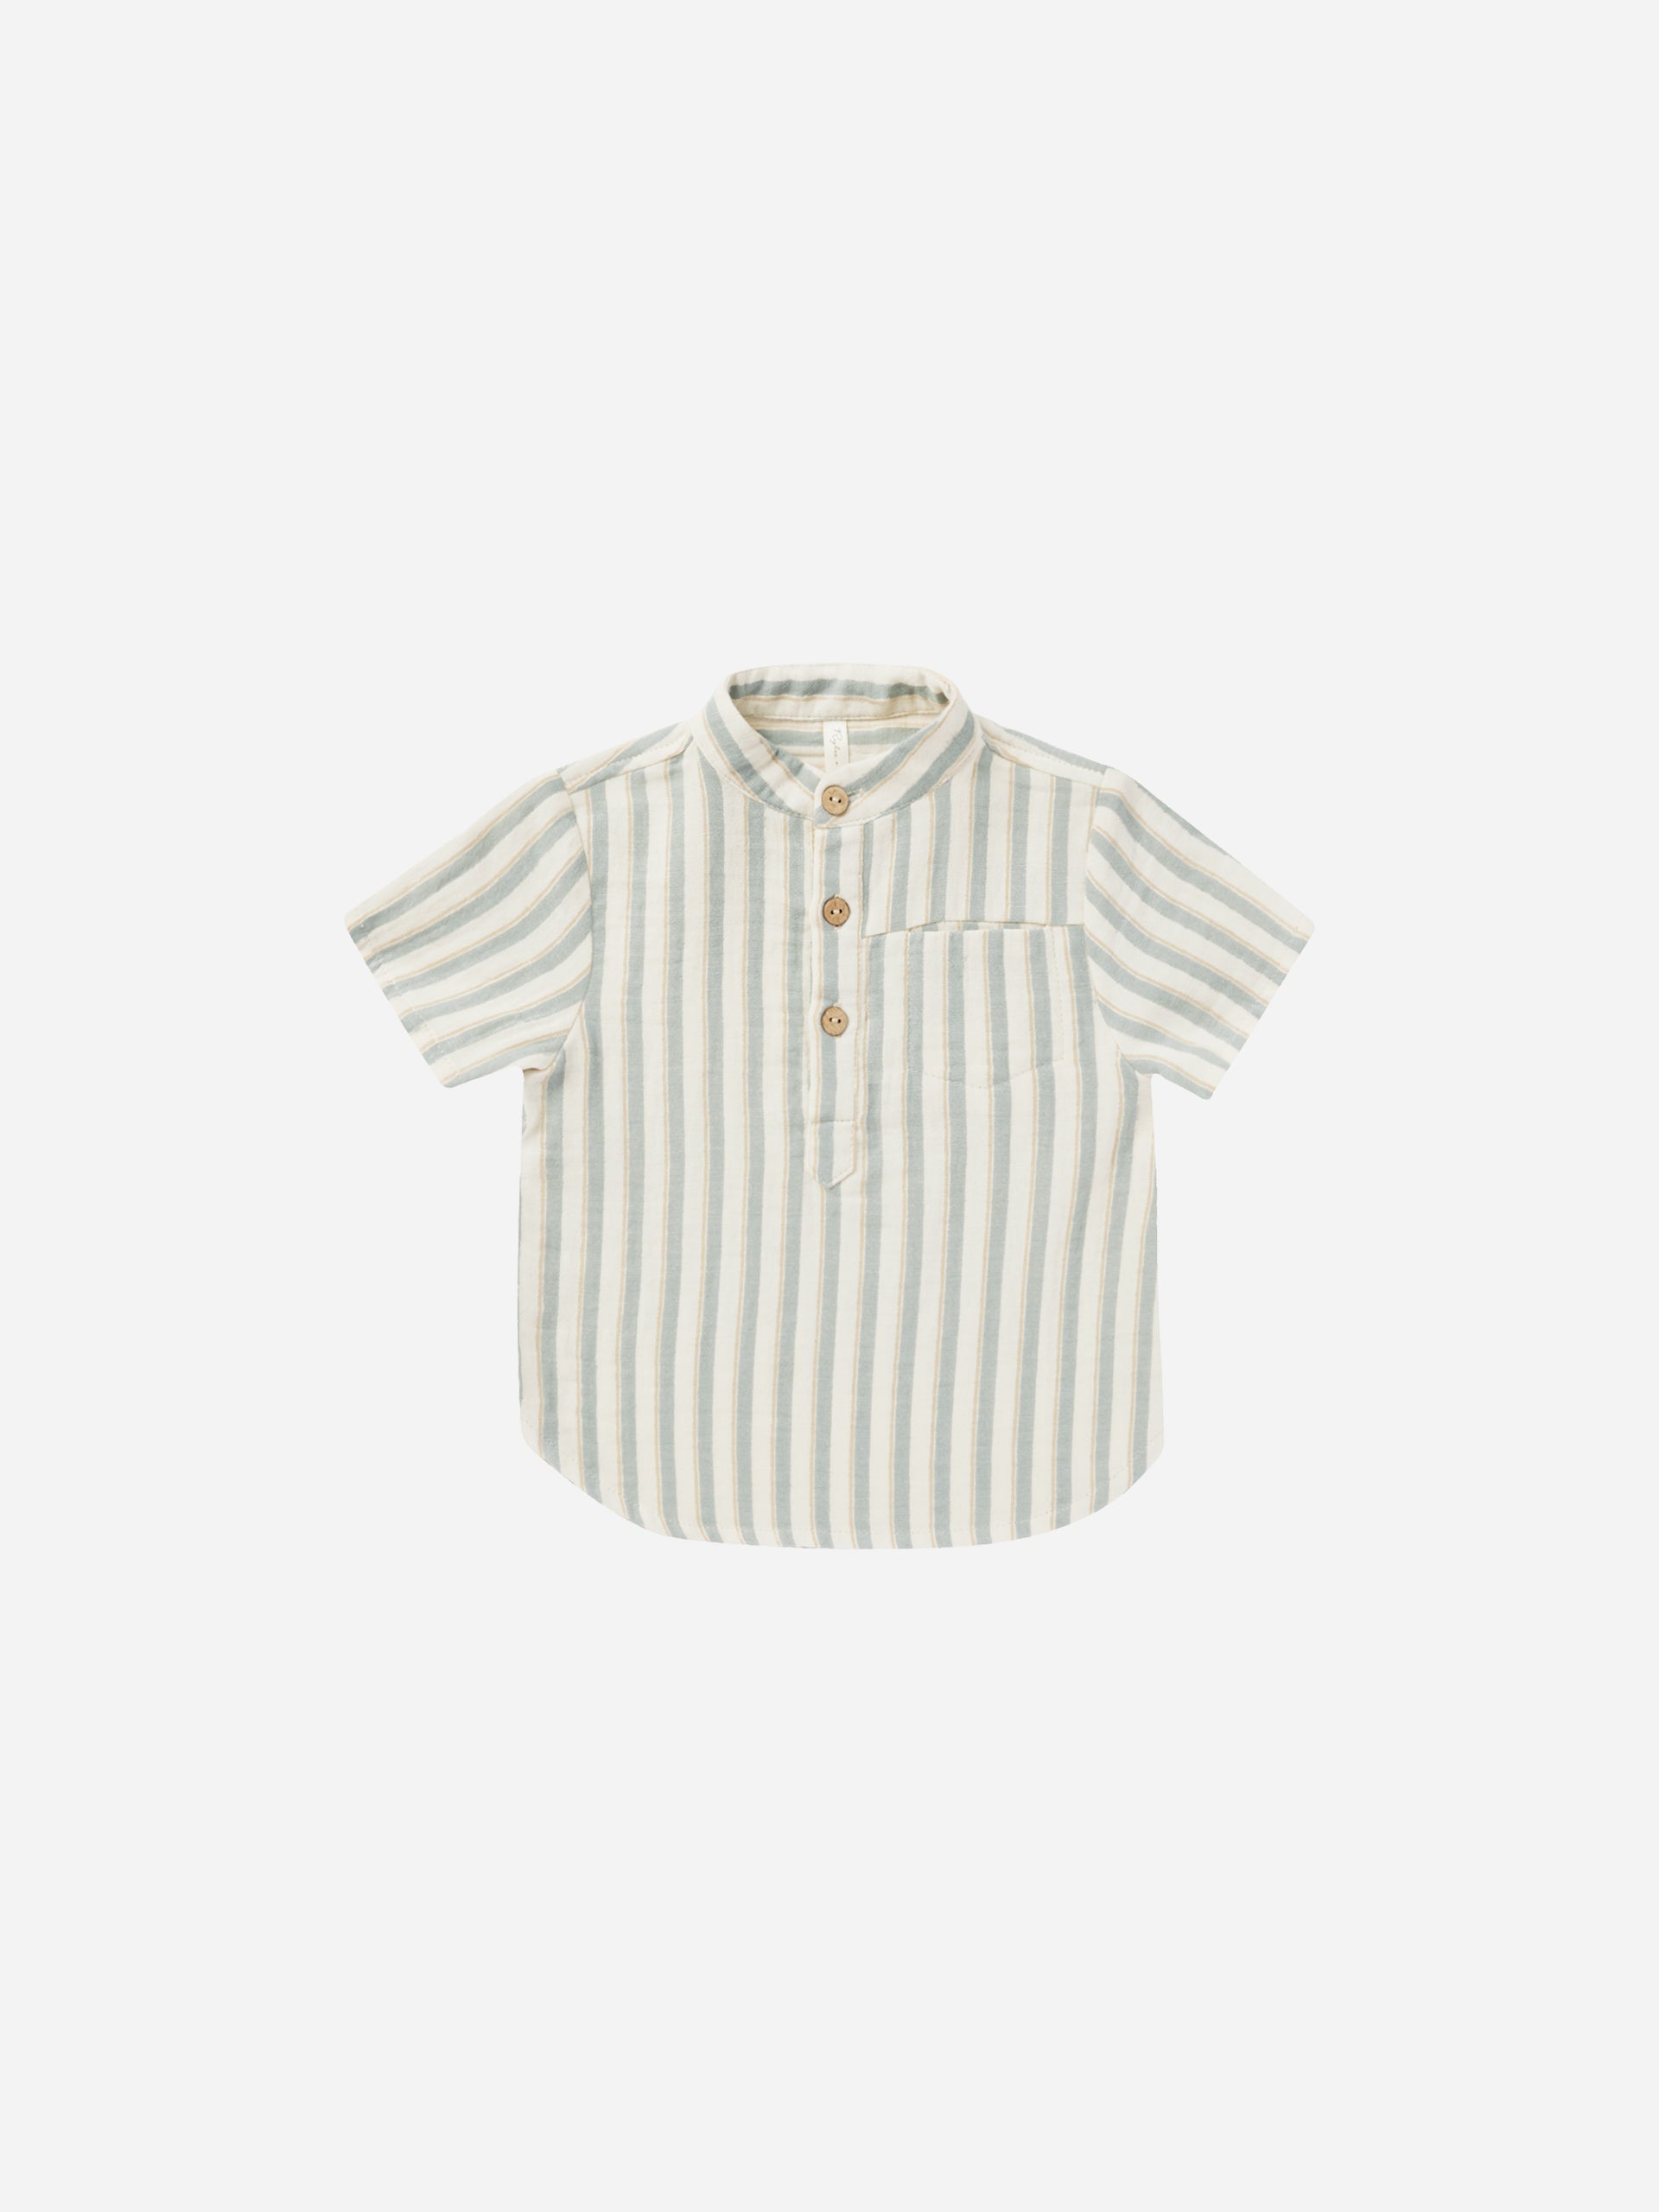 Mason Shirt || Ocean Stripe - Rylee + Cru | Kids Clothes | Trendy Baby Clothes | Modern Infant Outfits |